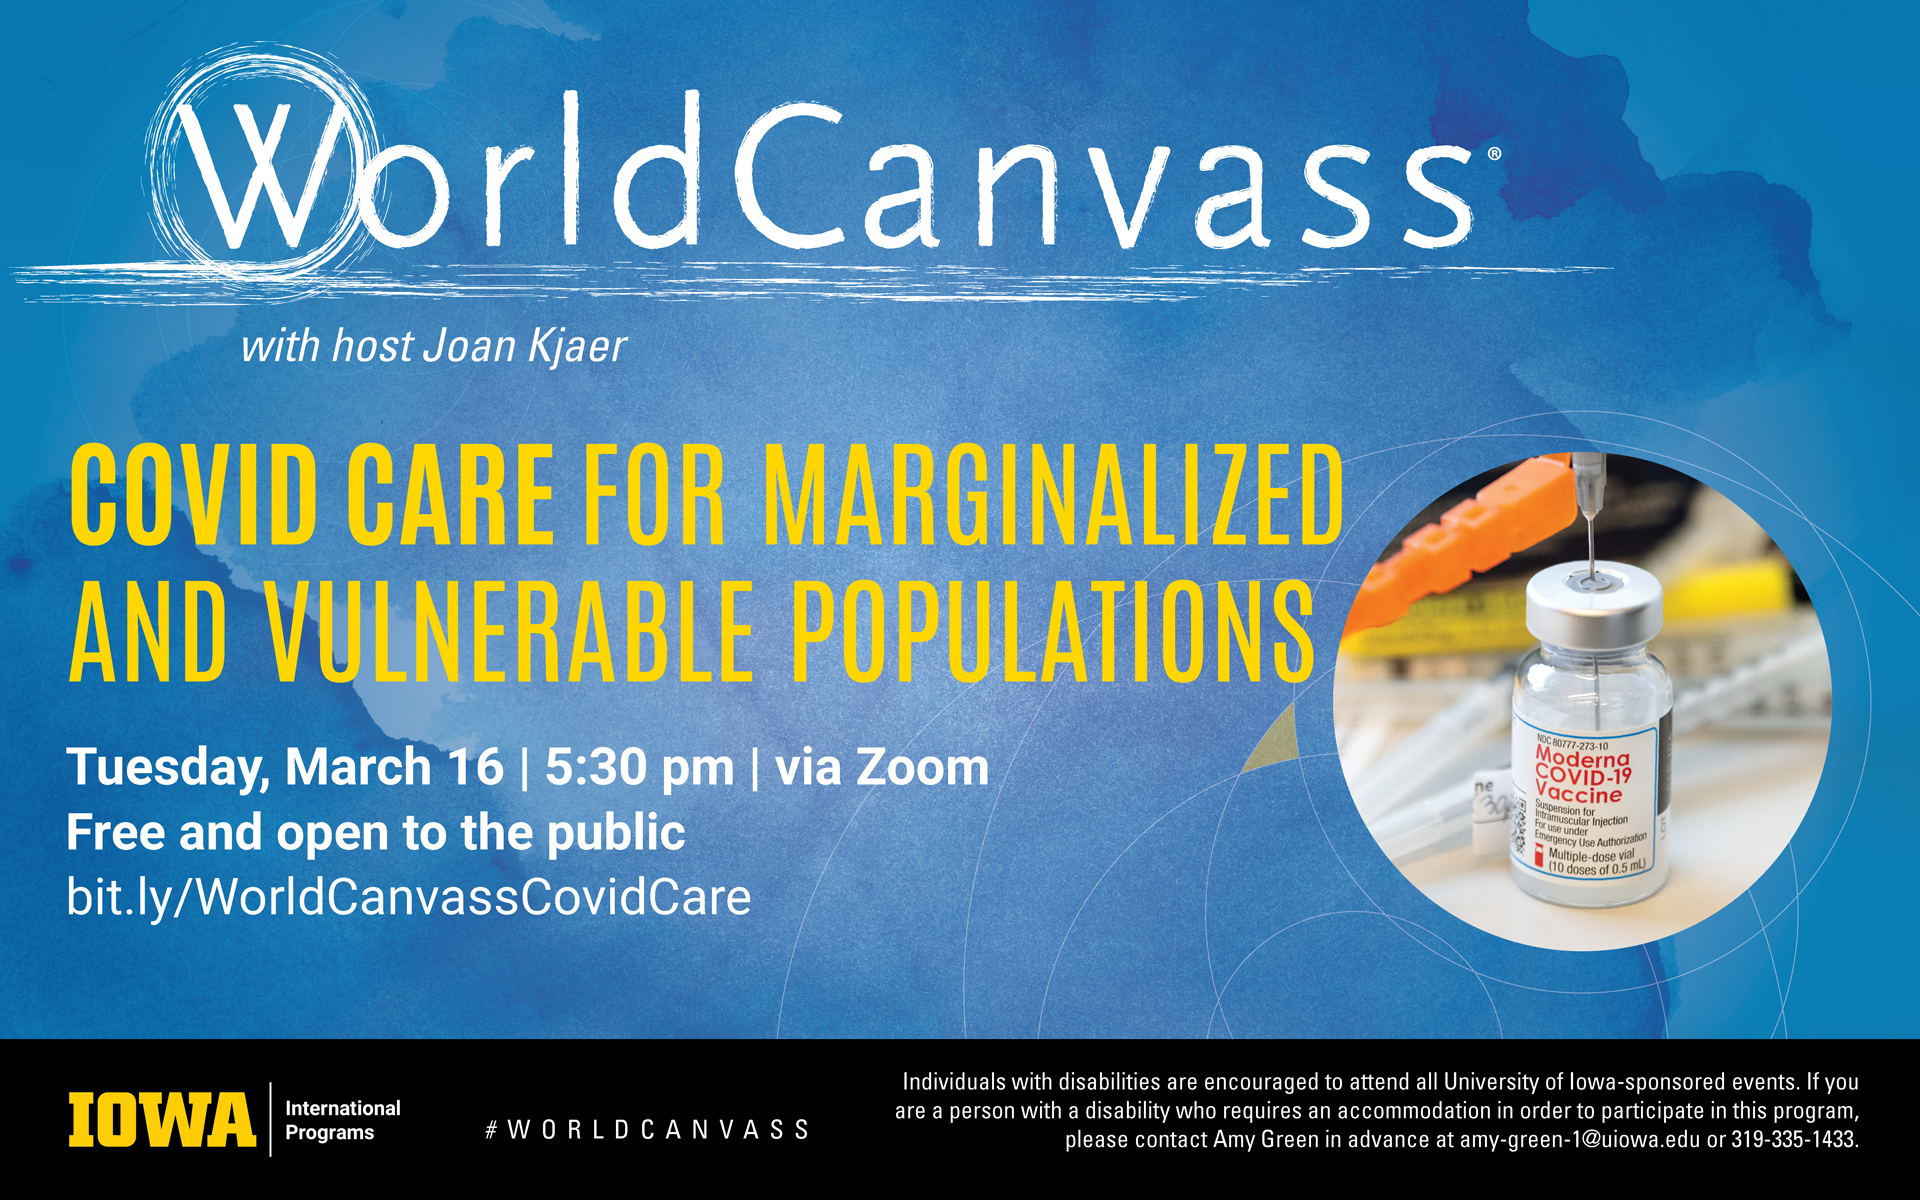 World Canvass with host Joan Kjaer Covid care for marginalized and vulnerable populations. Tuesday, March 16th, 2021 at 6:30pm via Zoom. Free and open to the public. bit.ly/WorldCanvassCovidCare